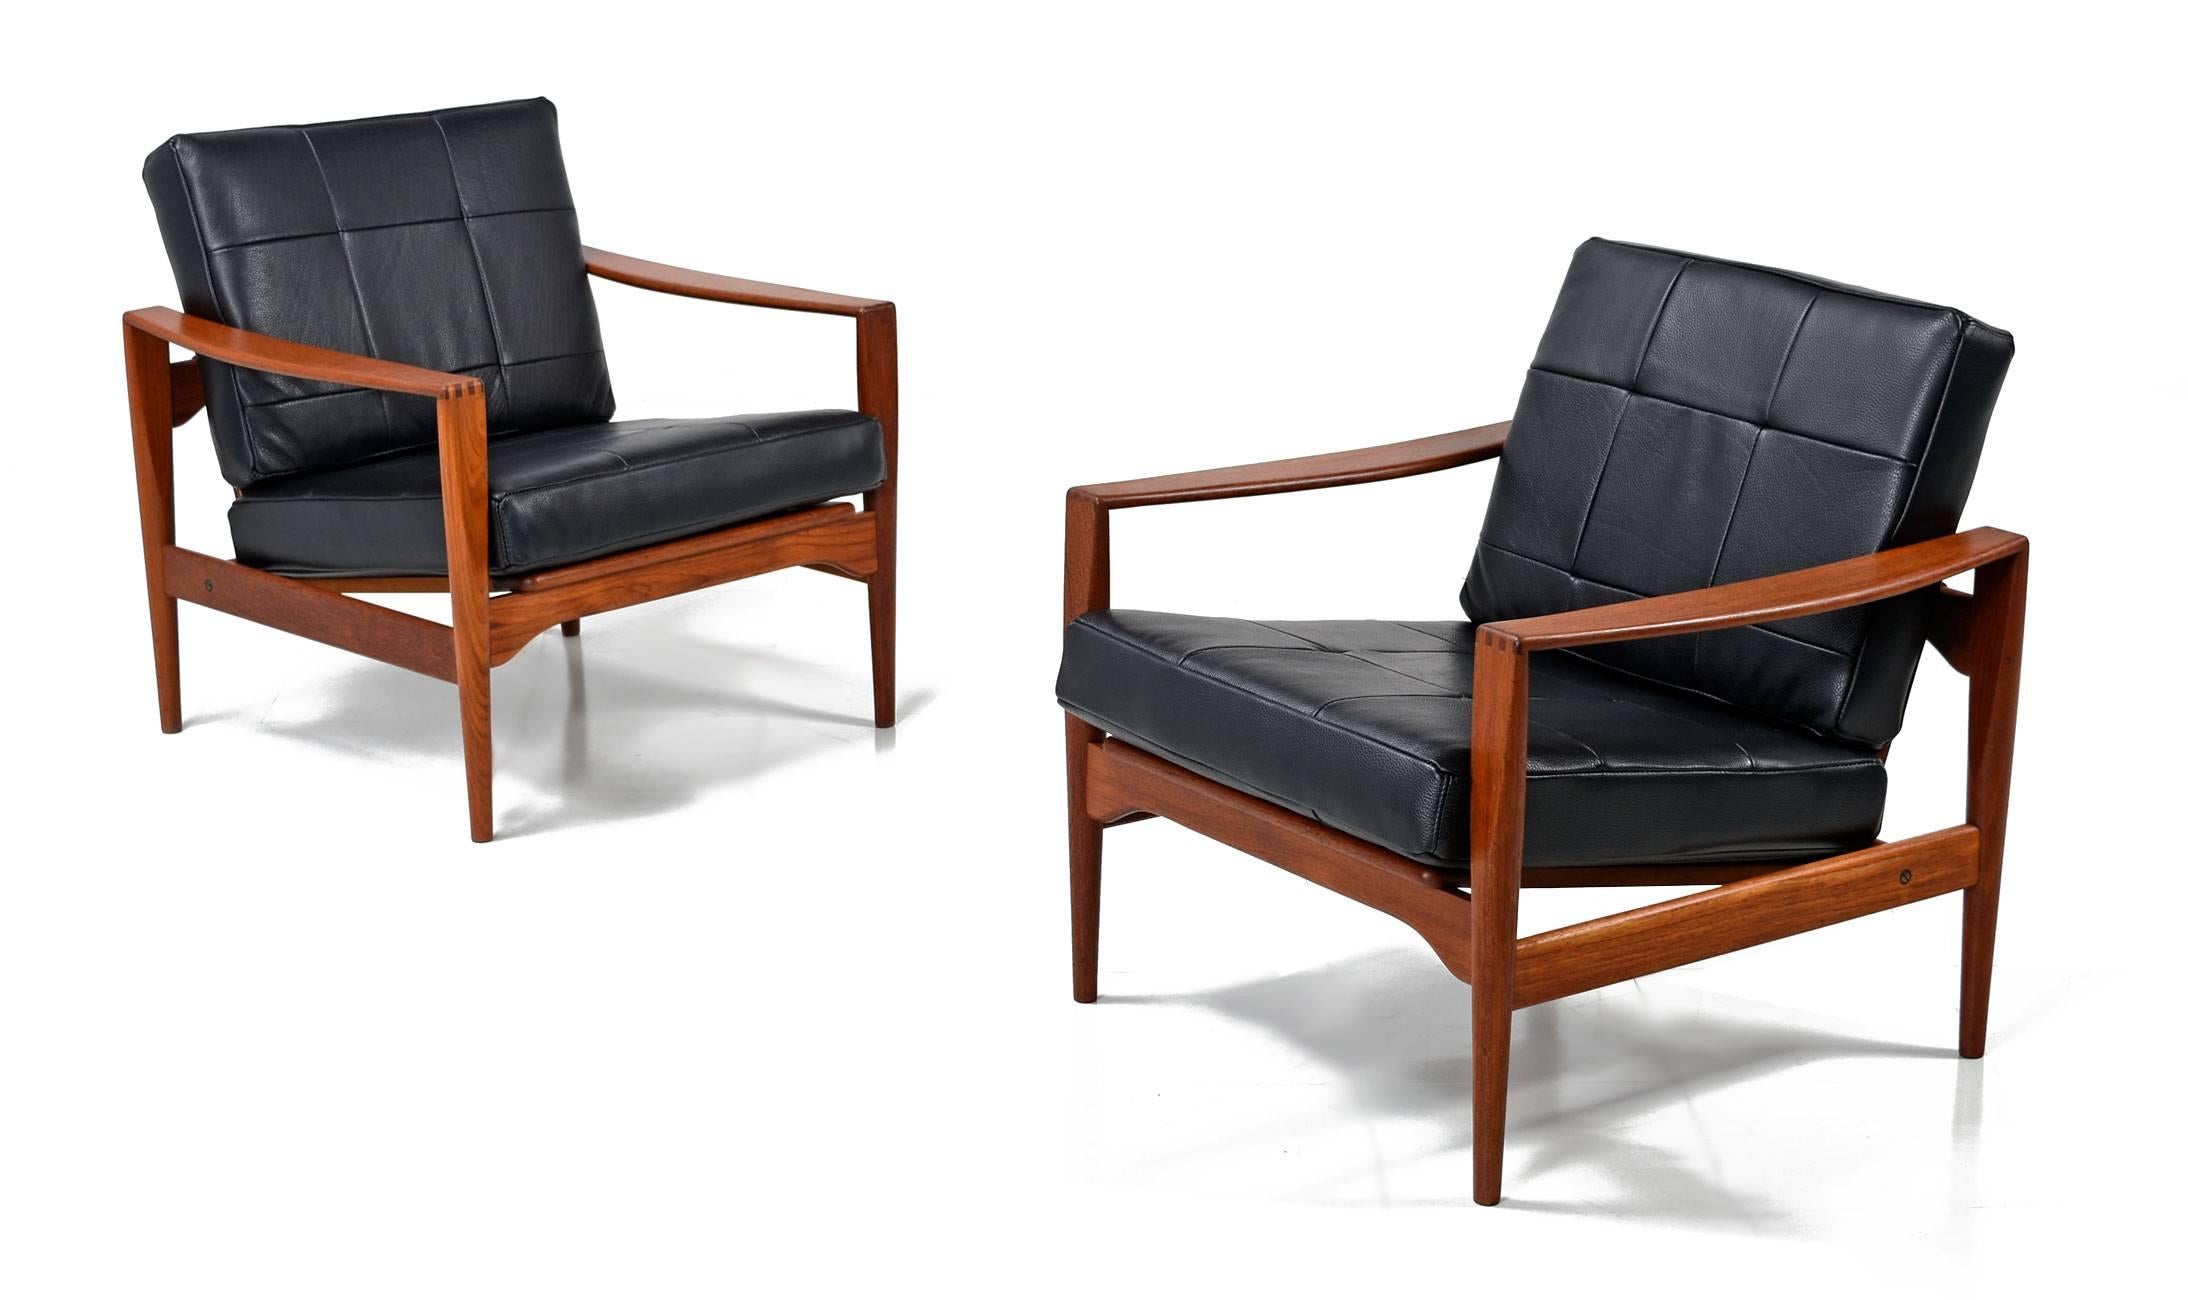 Beautifully restored pair of Mid-Century Modern Kai Kristiansen arm chairs, made for Feldballe Møbelfabrik in Denmark, 1960s. This stunning set are made of teak, featuring exposed finger joints and open framing. The seats have been newly upholstered